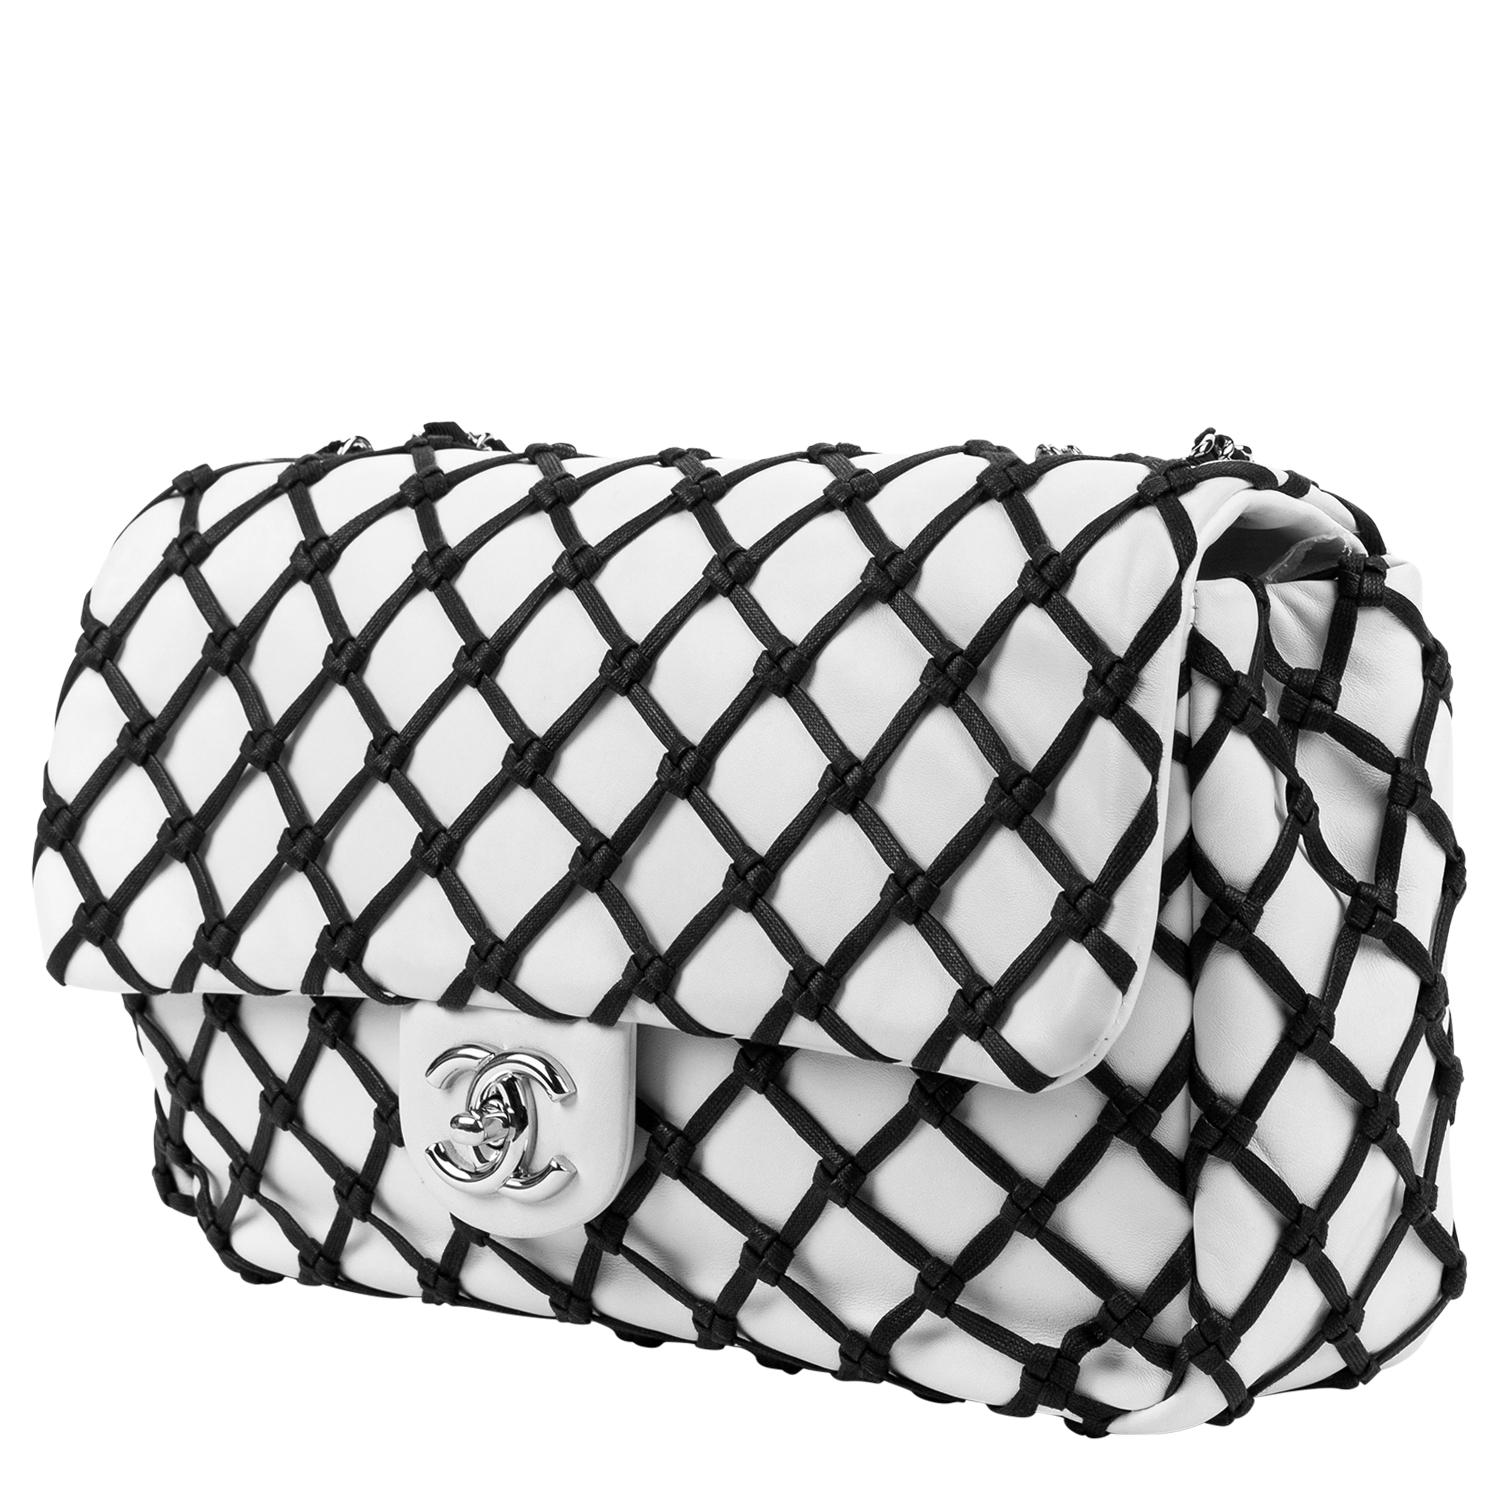 Speechless. Pair with fishnets! A classic yet edgy beauty created by Karl Lagerfeld (of course!) in 2010 emulating our favorite iconic flap bag. This Canebiers Chanel is crafted in a polished white leather, with a diamond quilted fabrication with